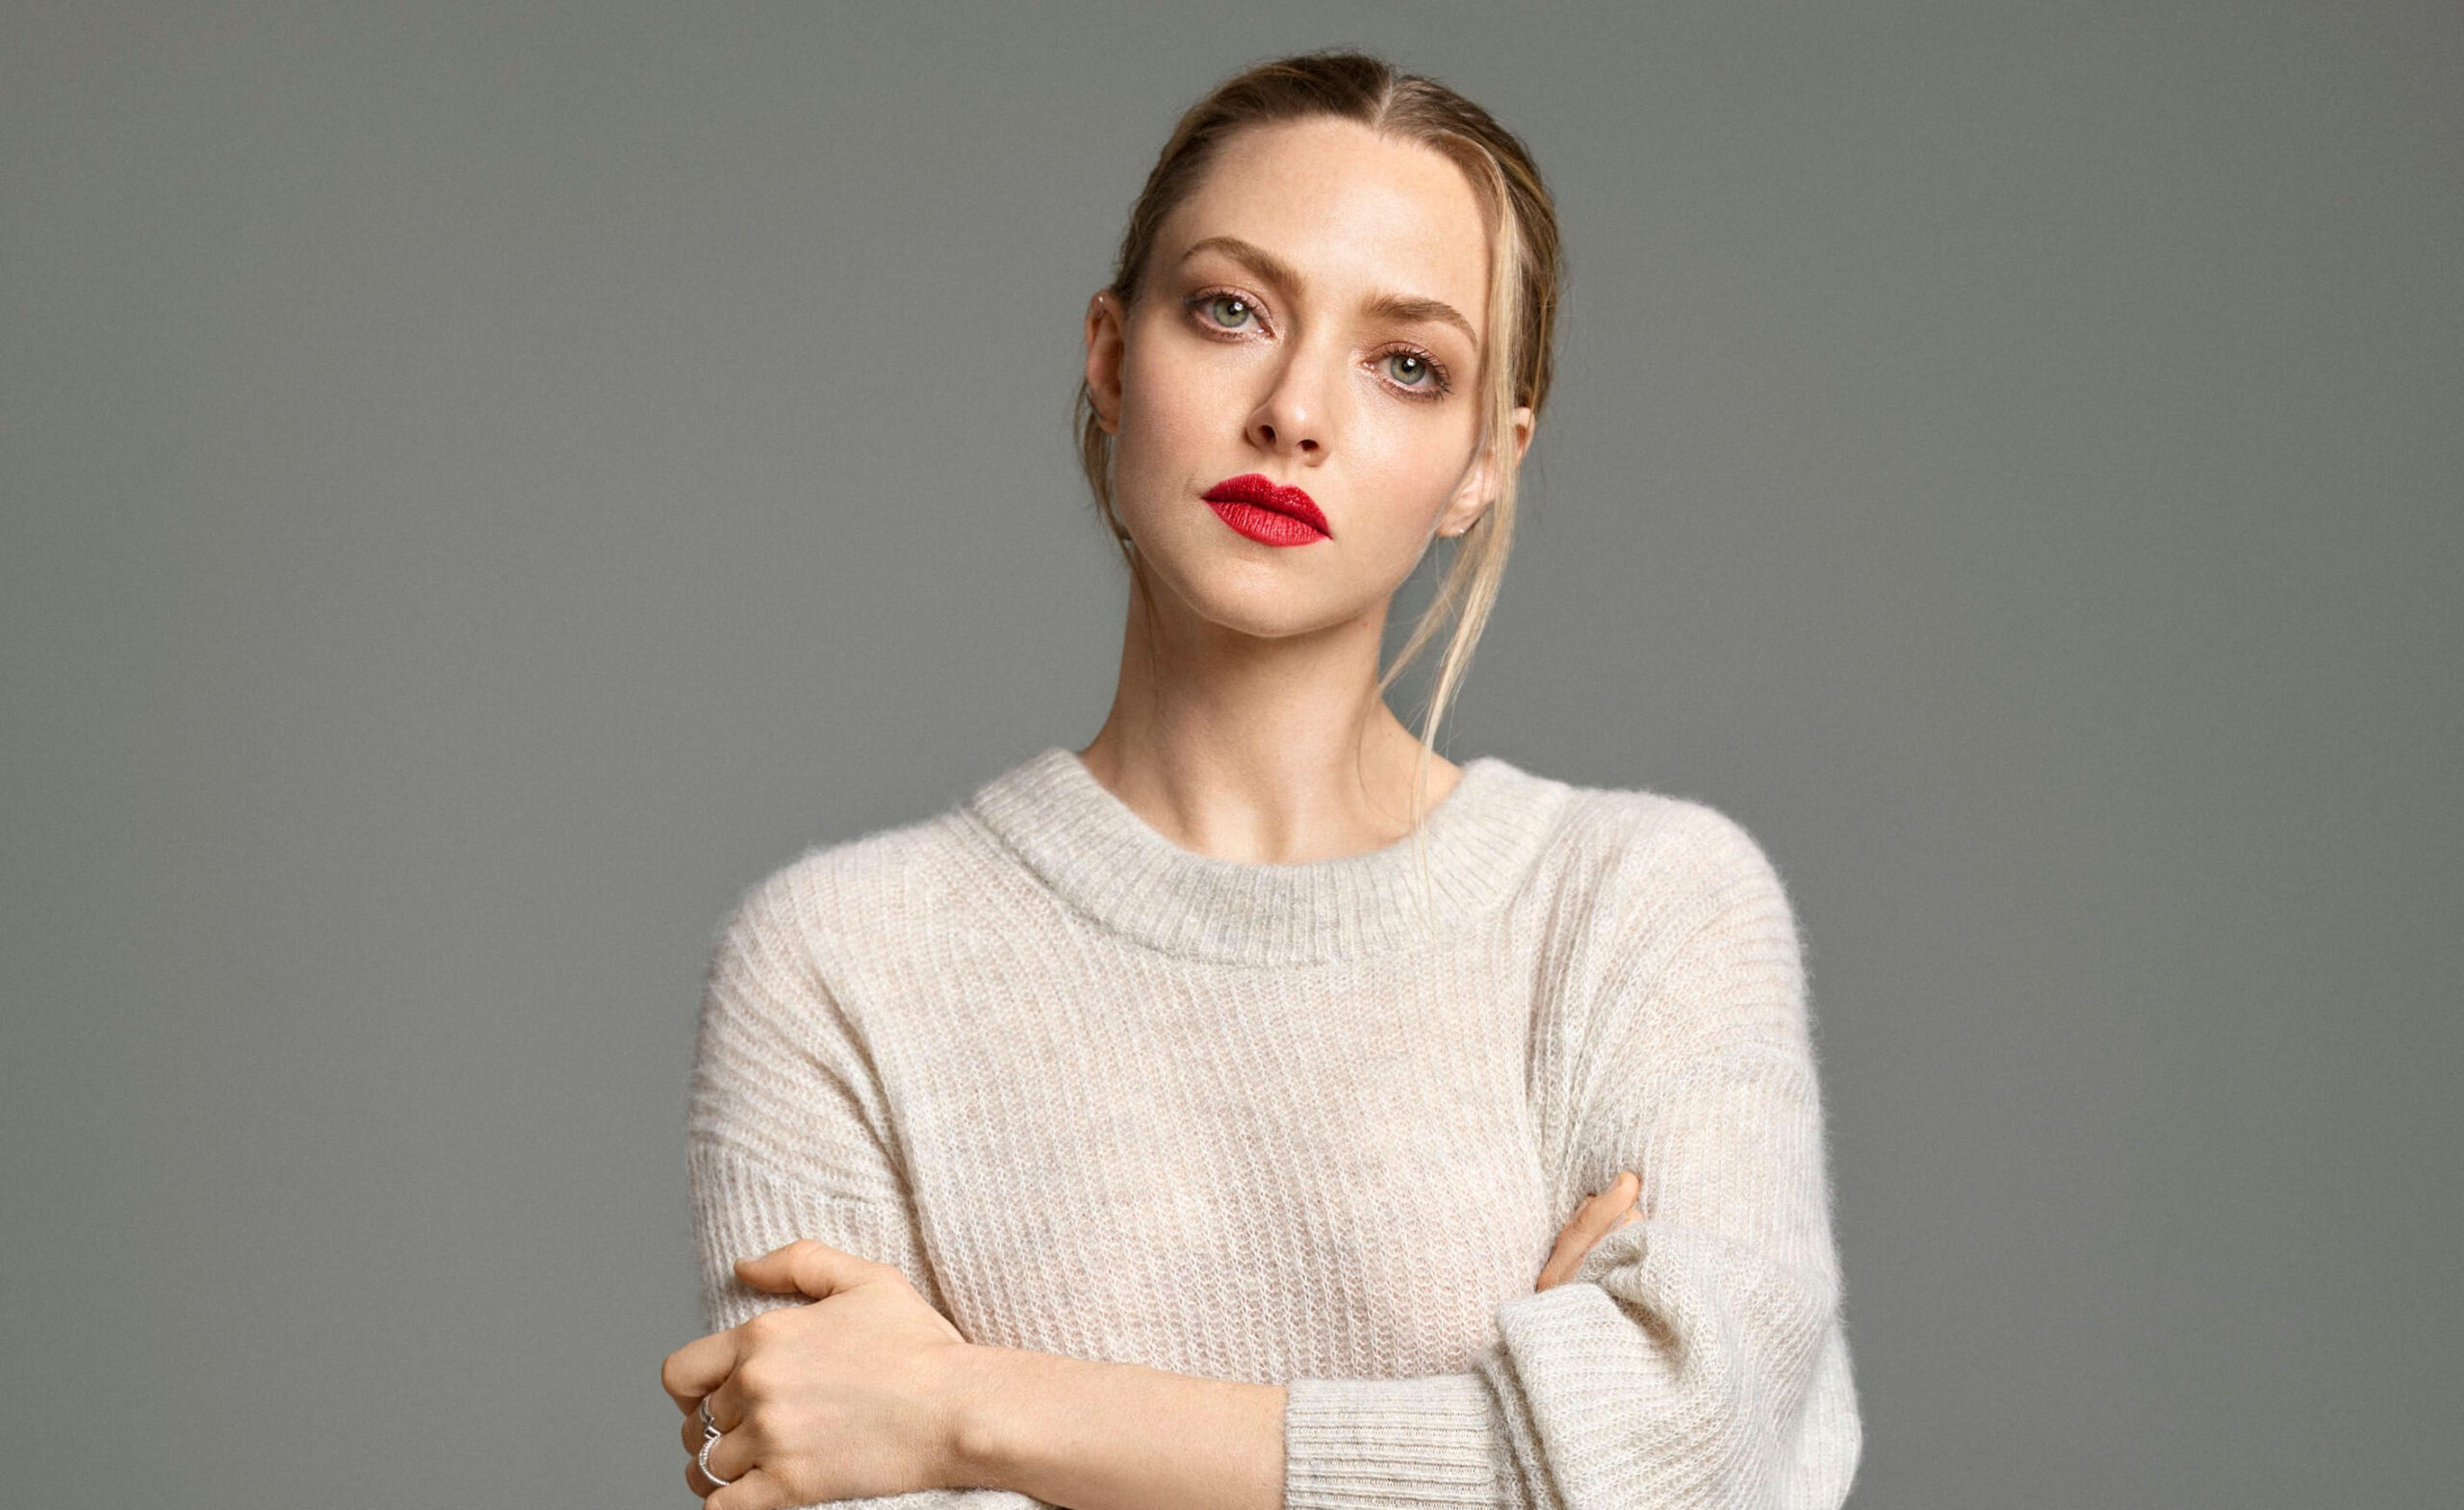 PEACOCK ANNOUNCES LIMITED SERIES ORDER OF SUSPENSE THRILLER LONG BRIGHT RIVER STARRING AND EXECUTIVE PRODUCED BY EMMY AWARD-WINNING ACTRESS AMANDA SEYFRIED